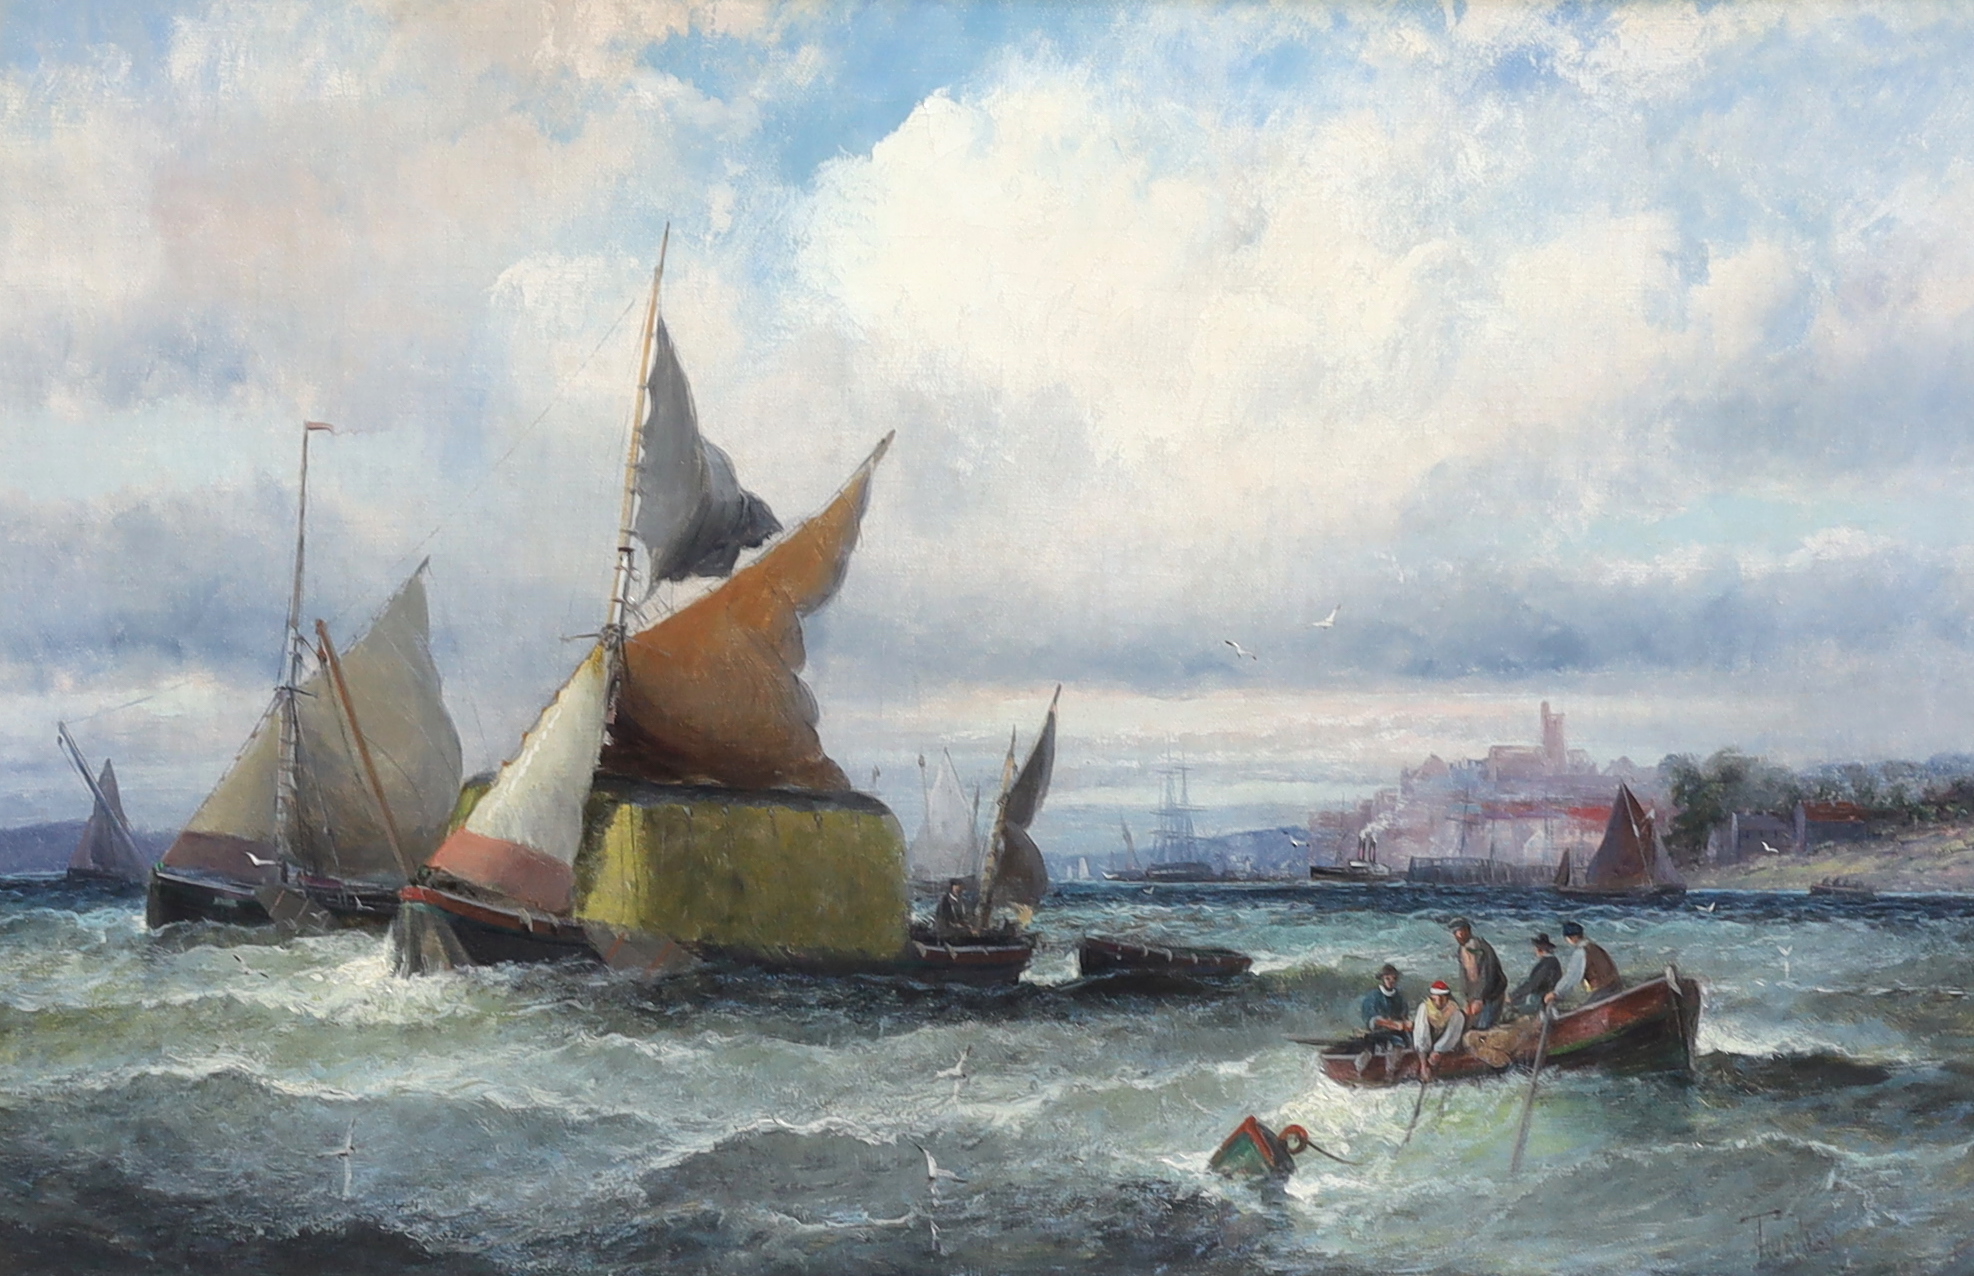 Hubert Thornley (William Anslow Thornley) (fl.1859-1898), Hay barges and other shipping off the coast, oil on canvas, 40 x 60cm